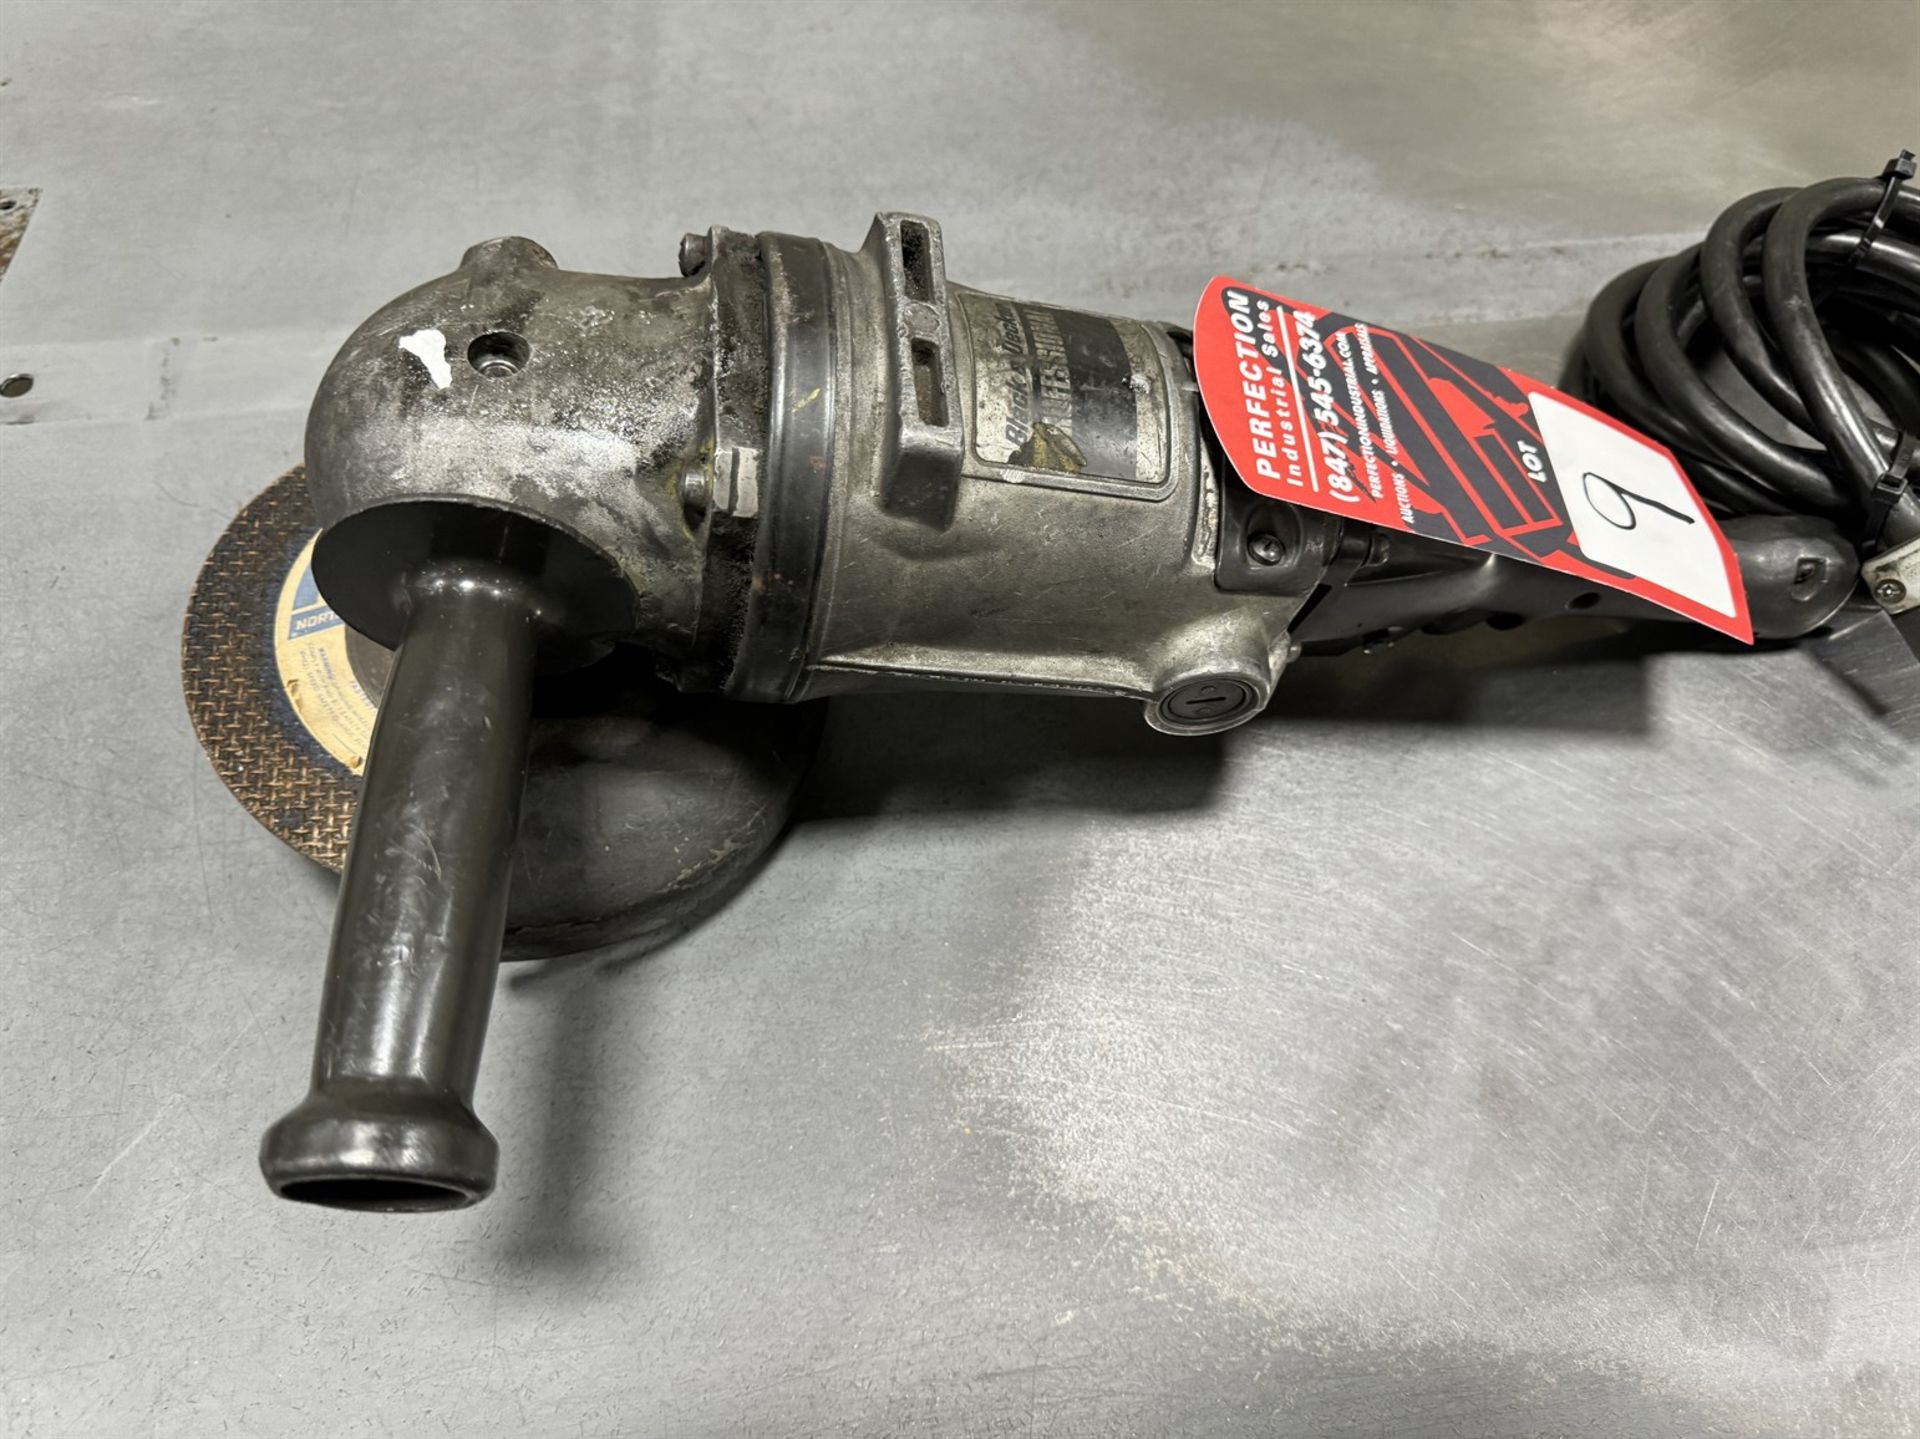 BLACK & DECKER Professional 7" Heavy Duty Angle Grinder - Image 2 of 2